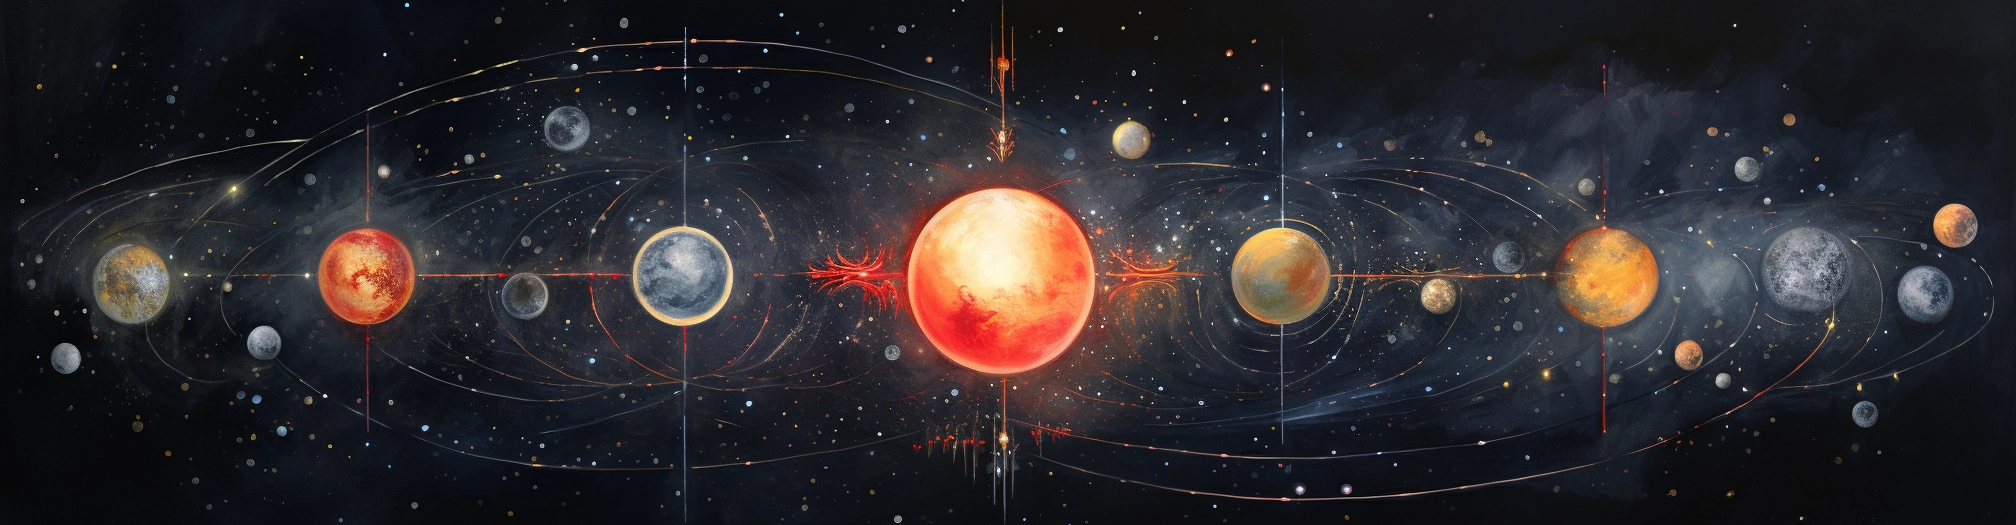 stylistic painting representing political connections within star systems